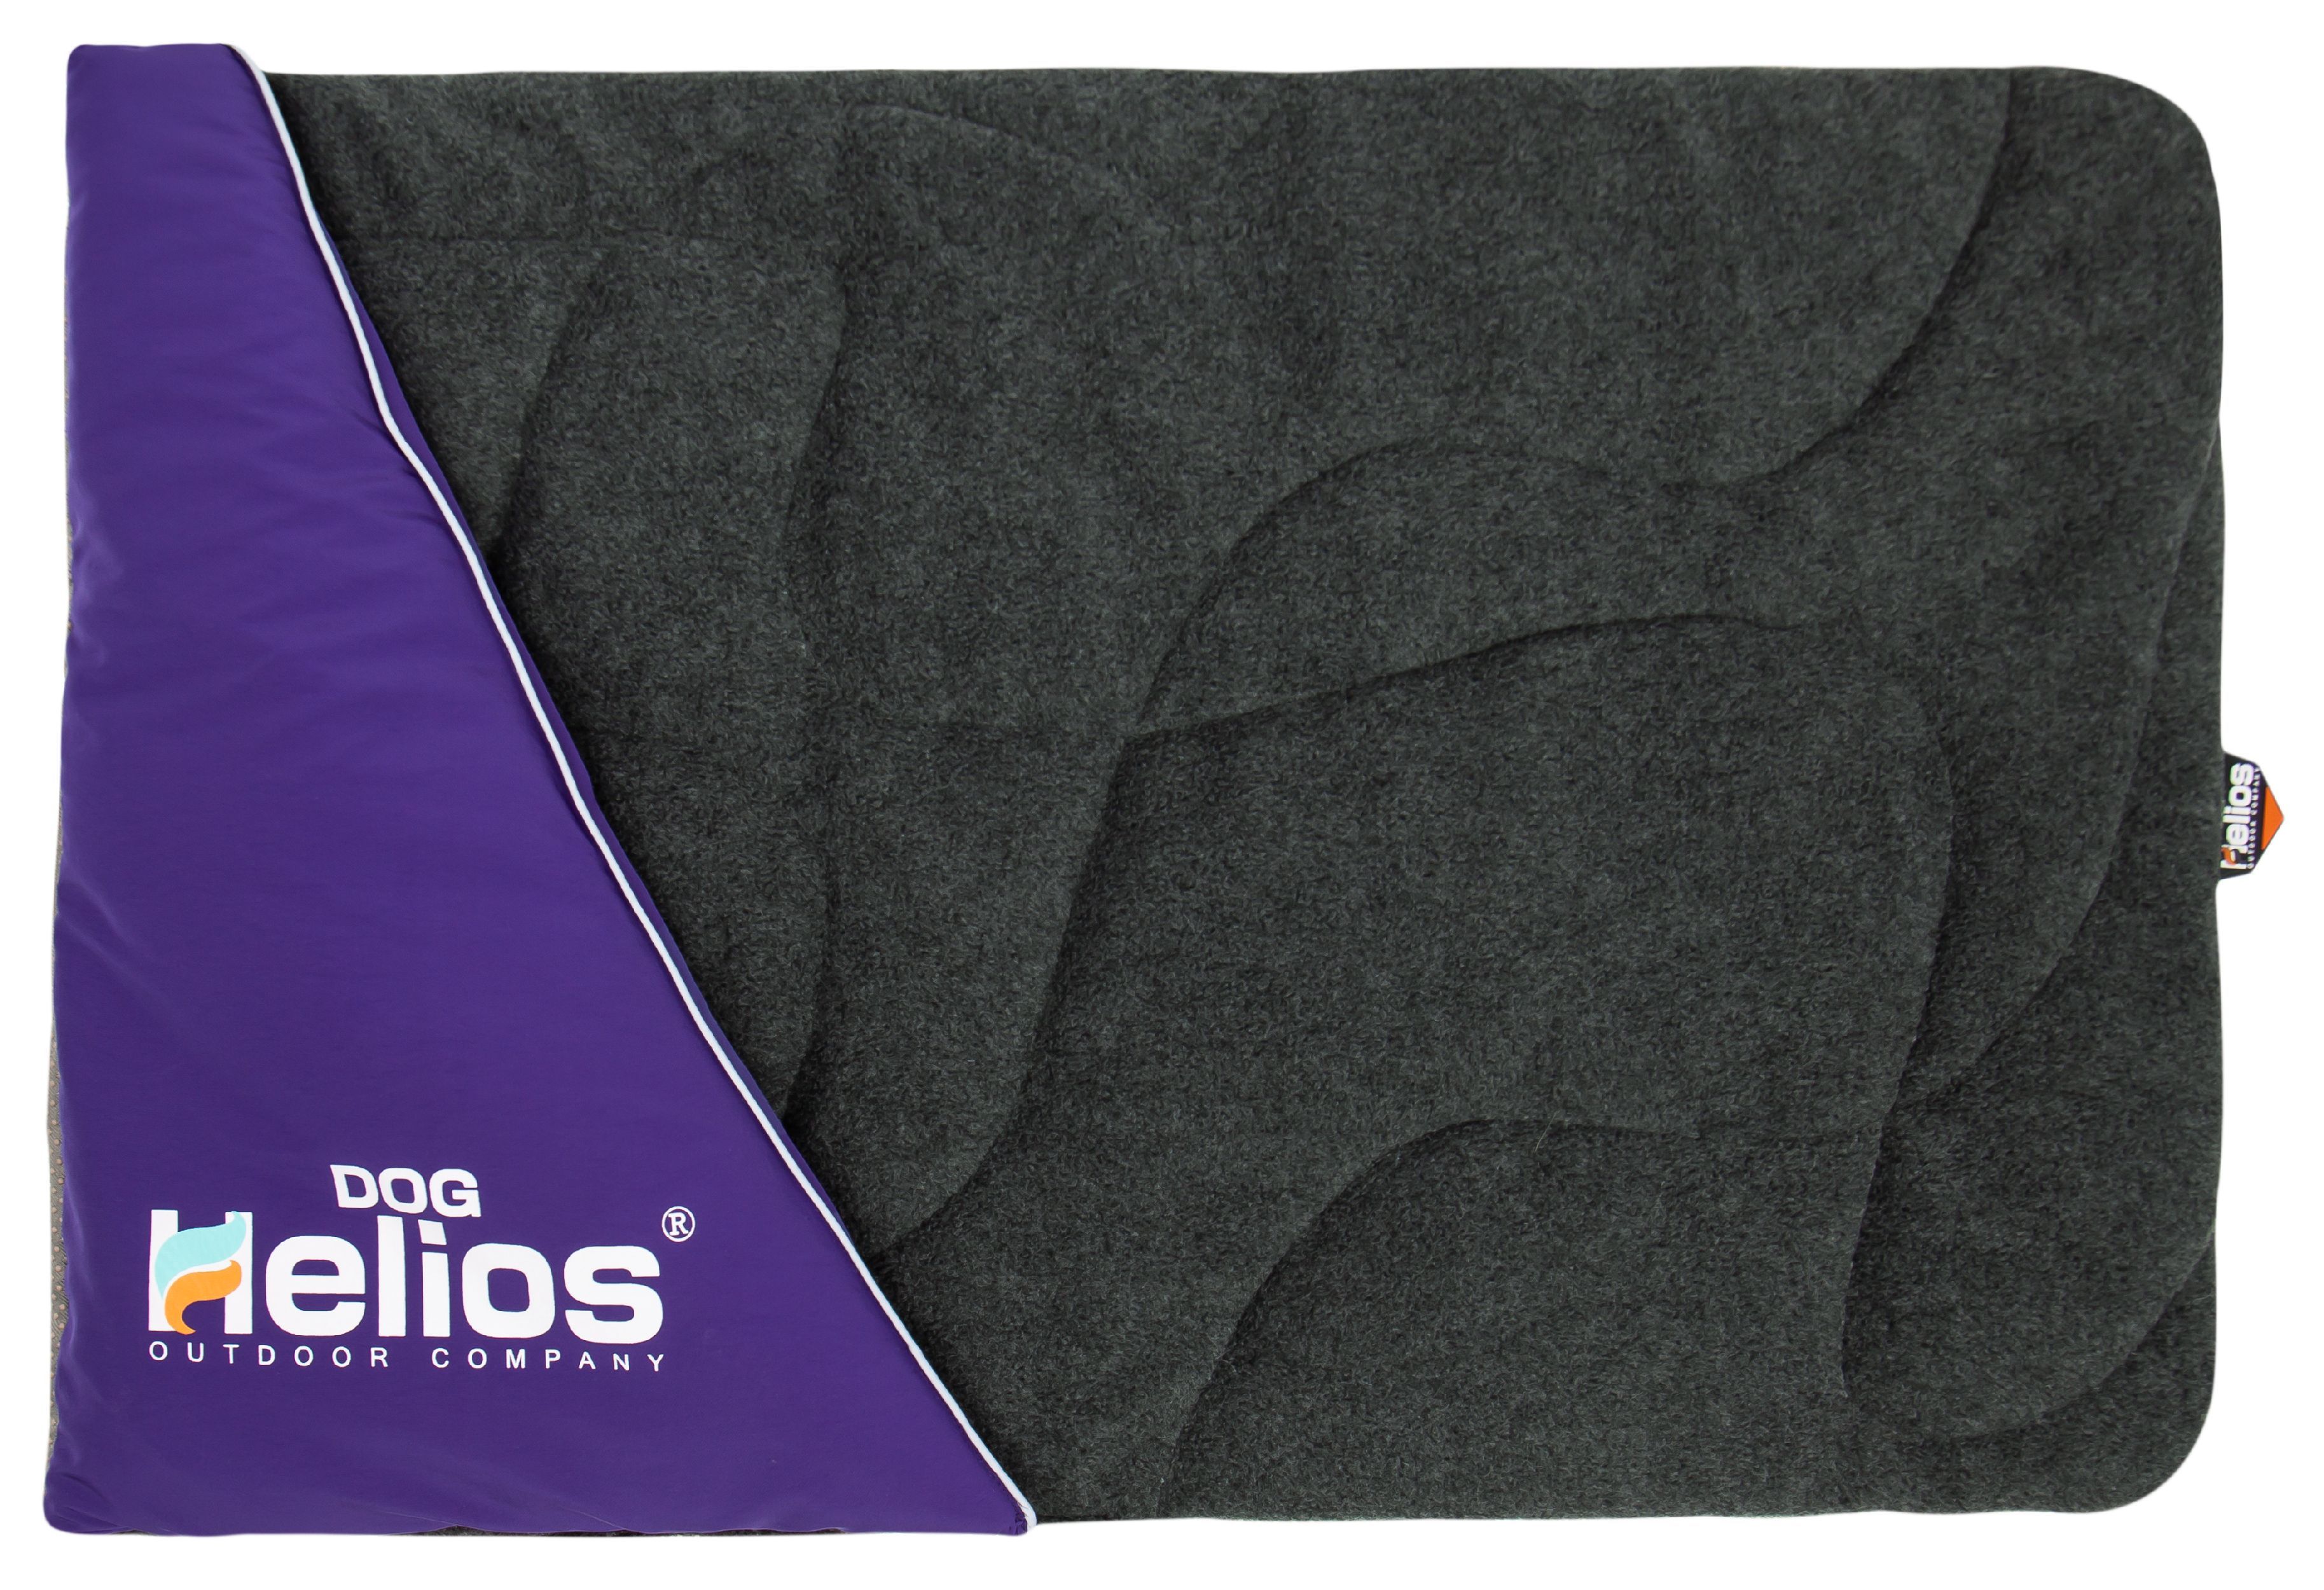 Dog Helios ® 'Expedition' Sporty Travel Camping Pillow Dog Bed Purple, Black 